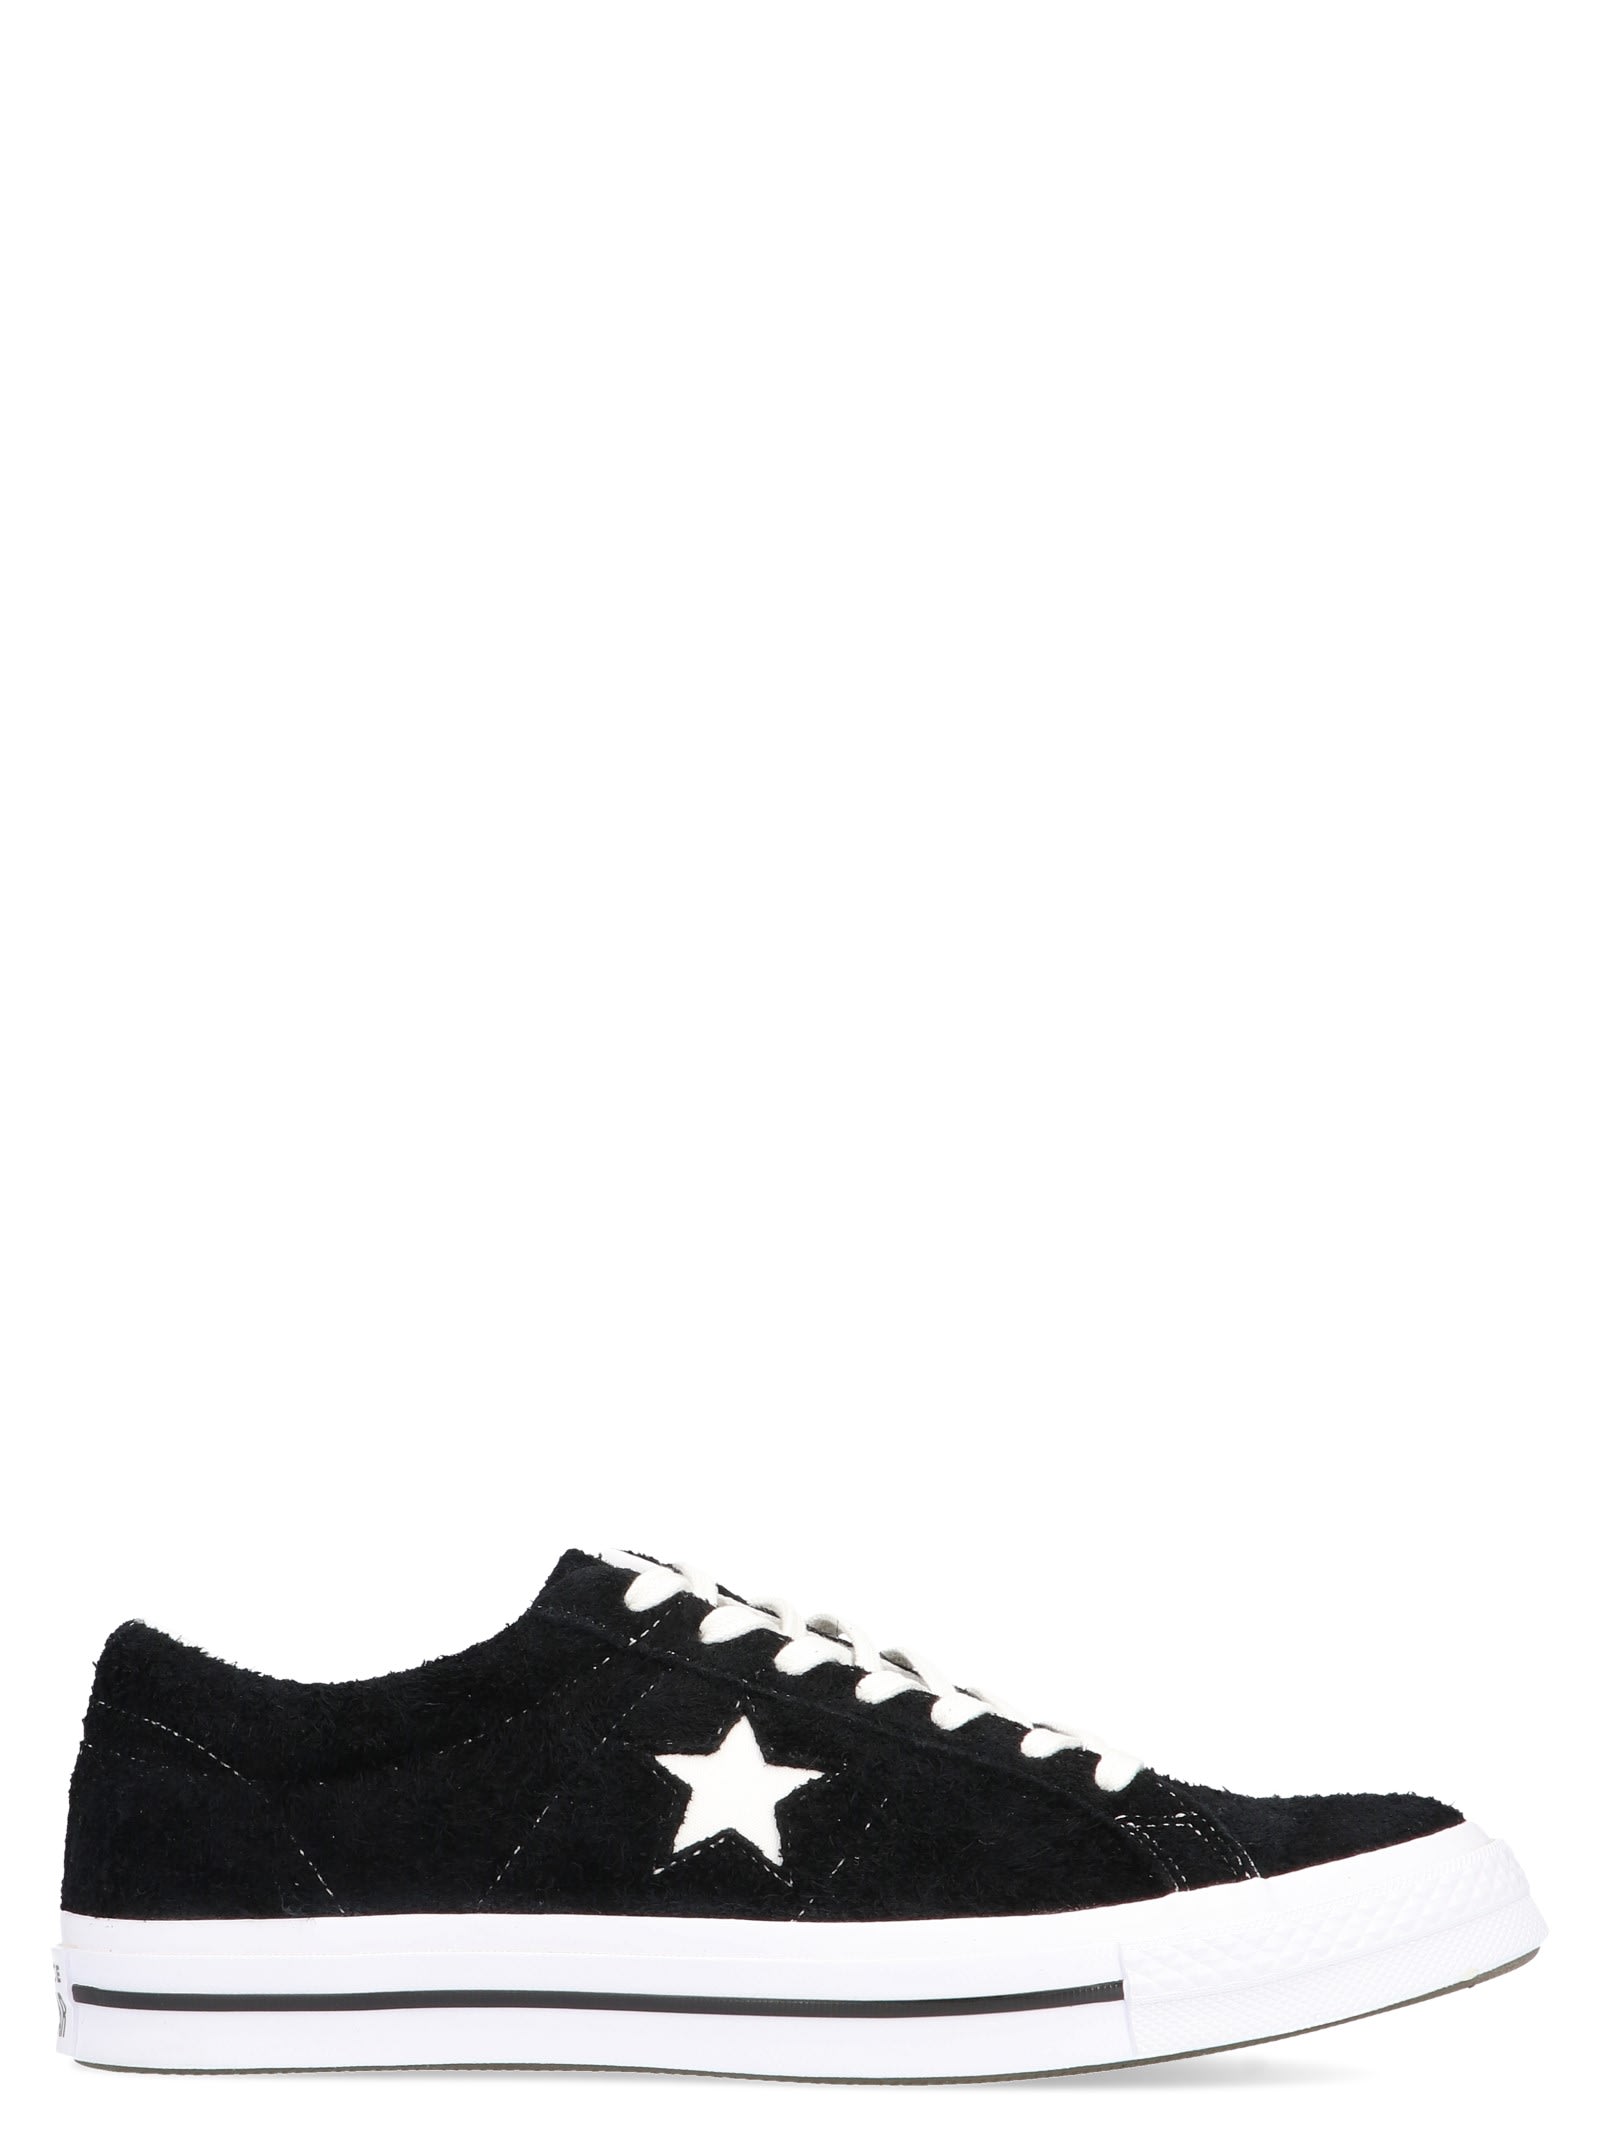 converse one star leather shoes